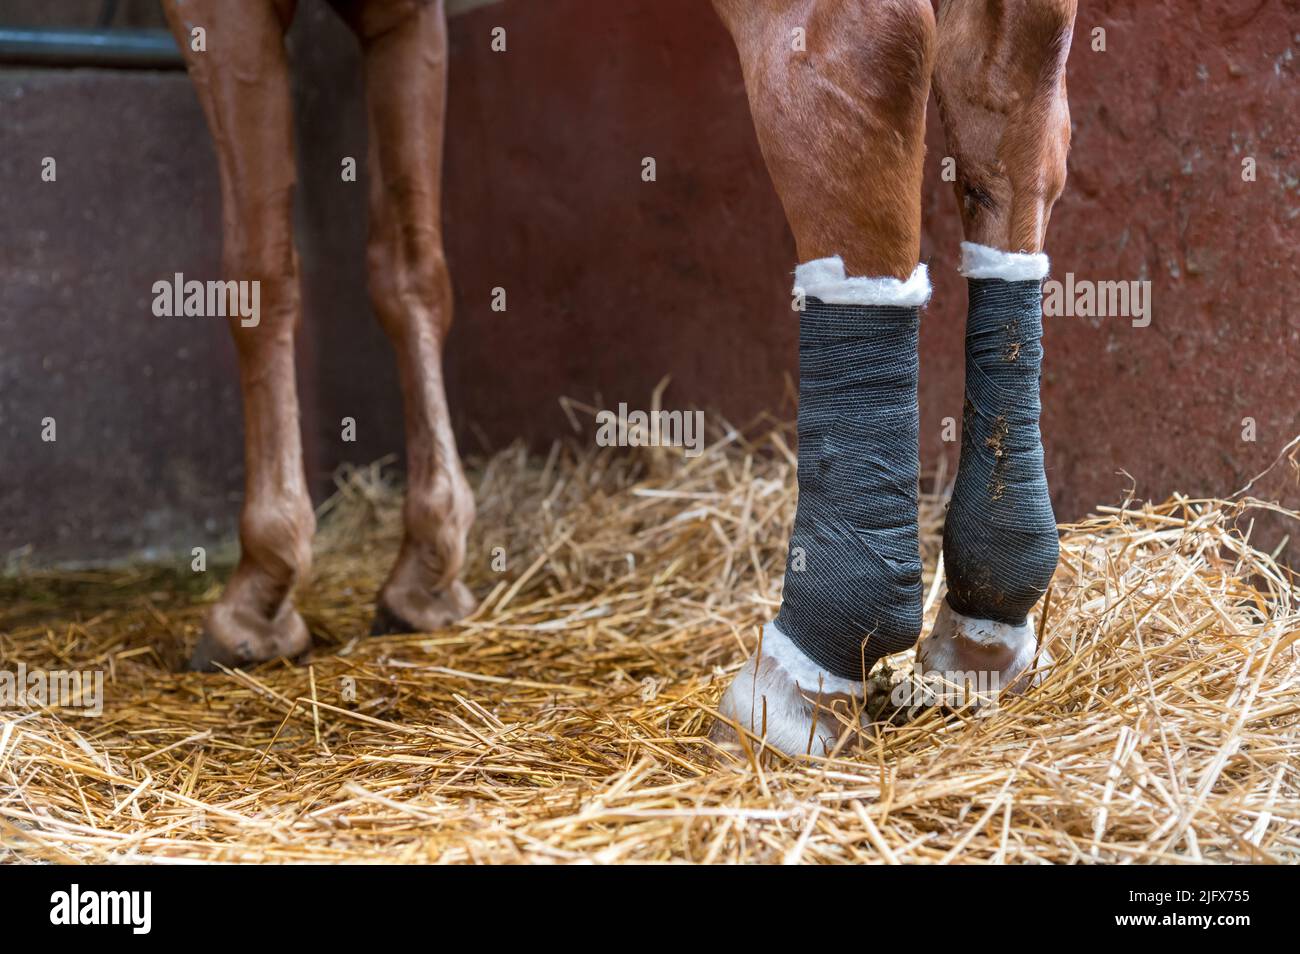 Chestnut horse with wraps round hind legs standing on hay in stall inside stable Stock Photo